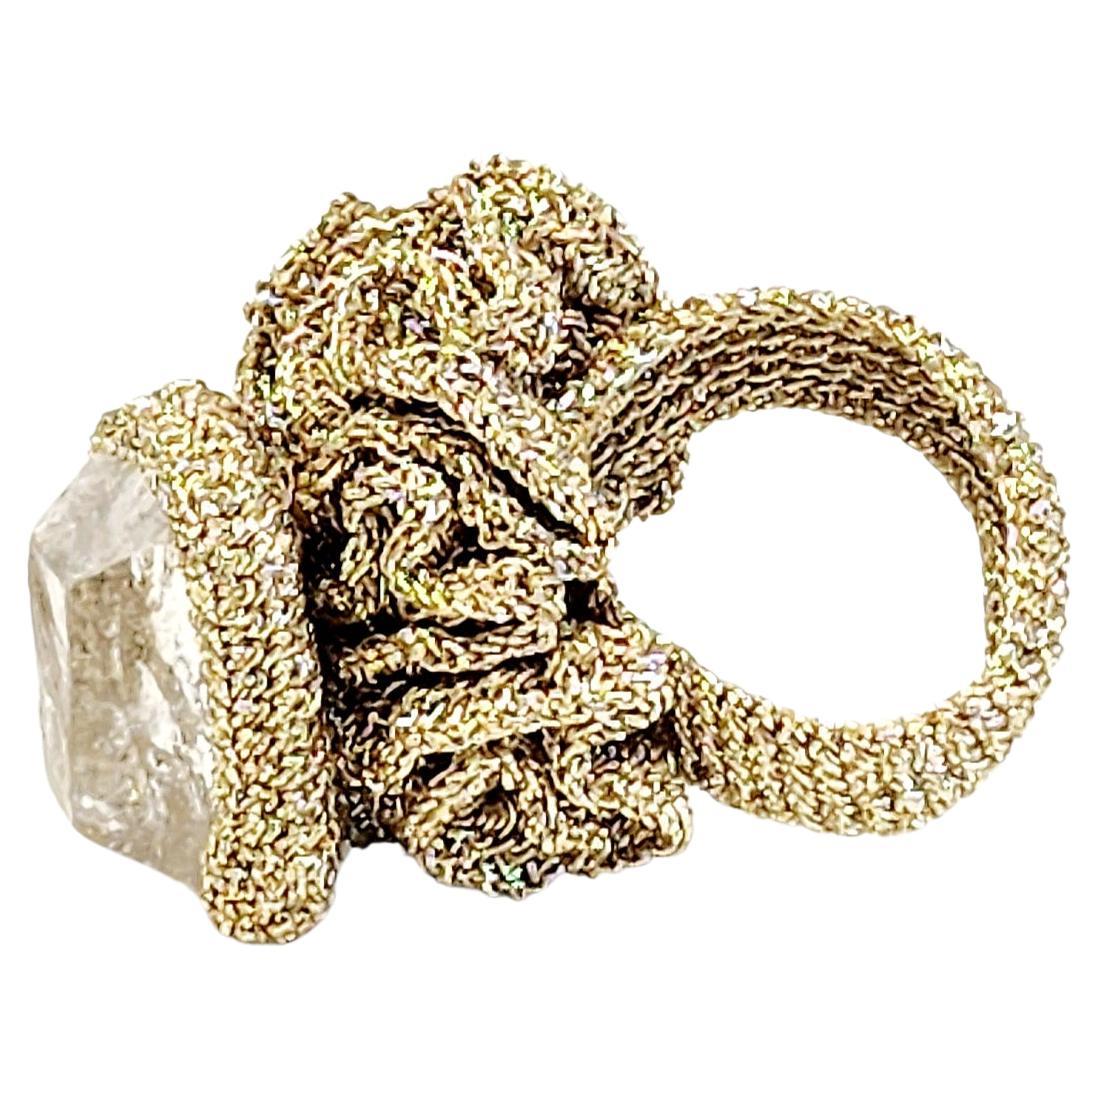 Golden Thread Crochet Ring Crystal Clear Stone For Sale